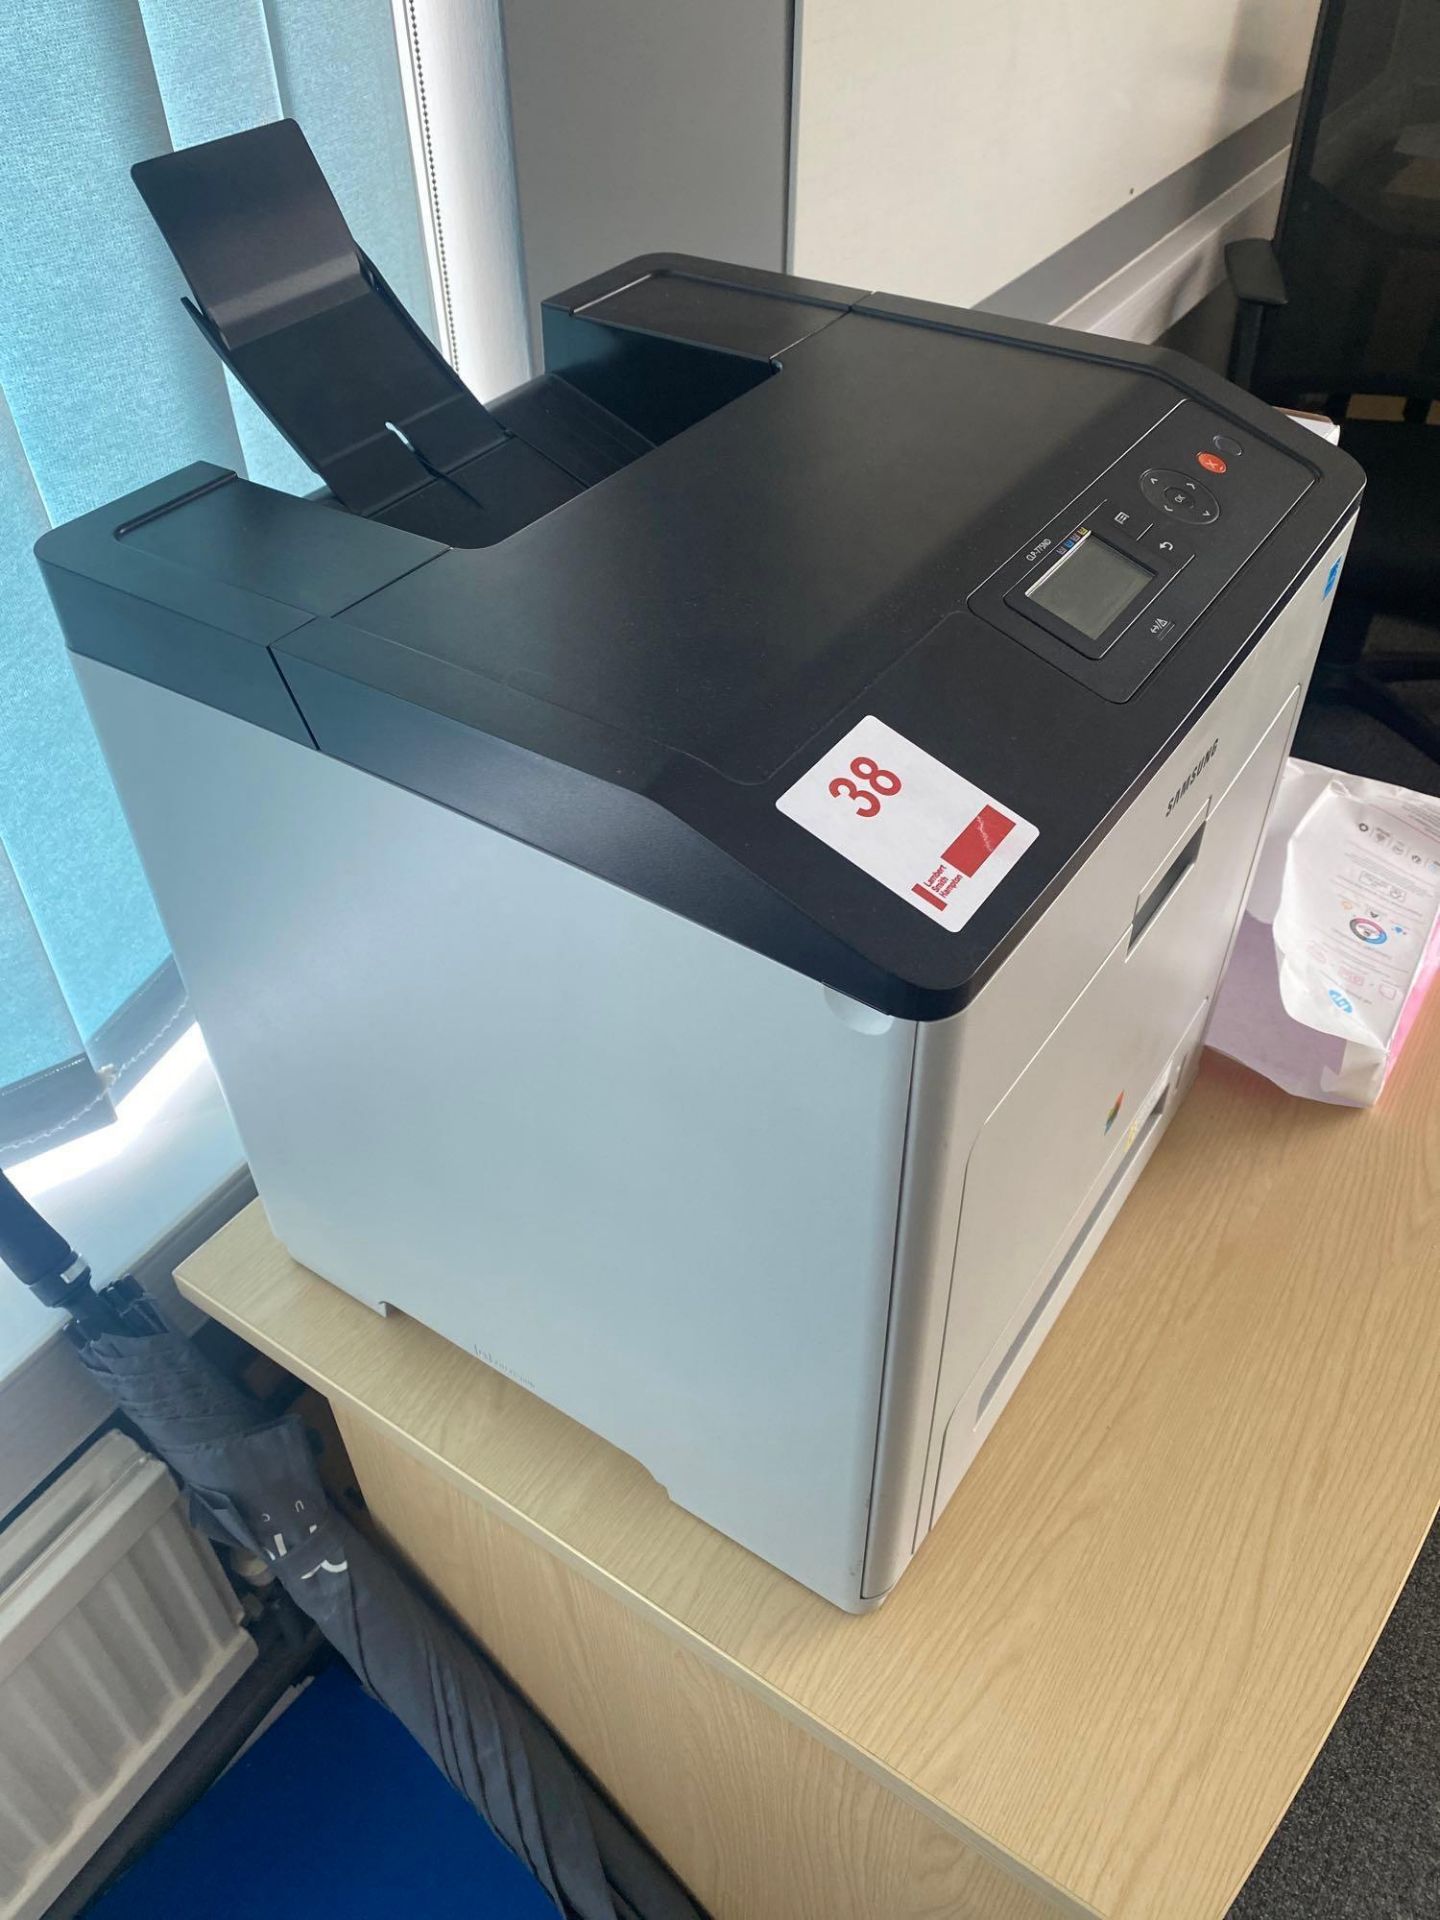 Samsung CLP – 775ND colour printer - Image 2 of 4